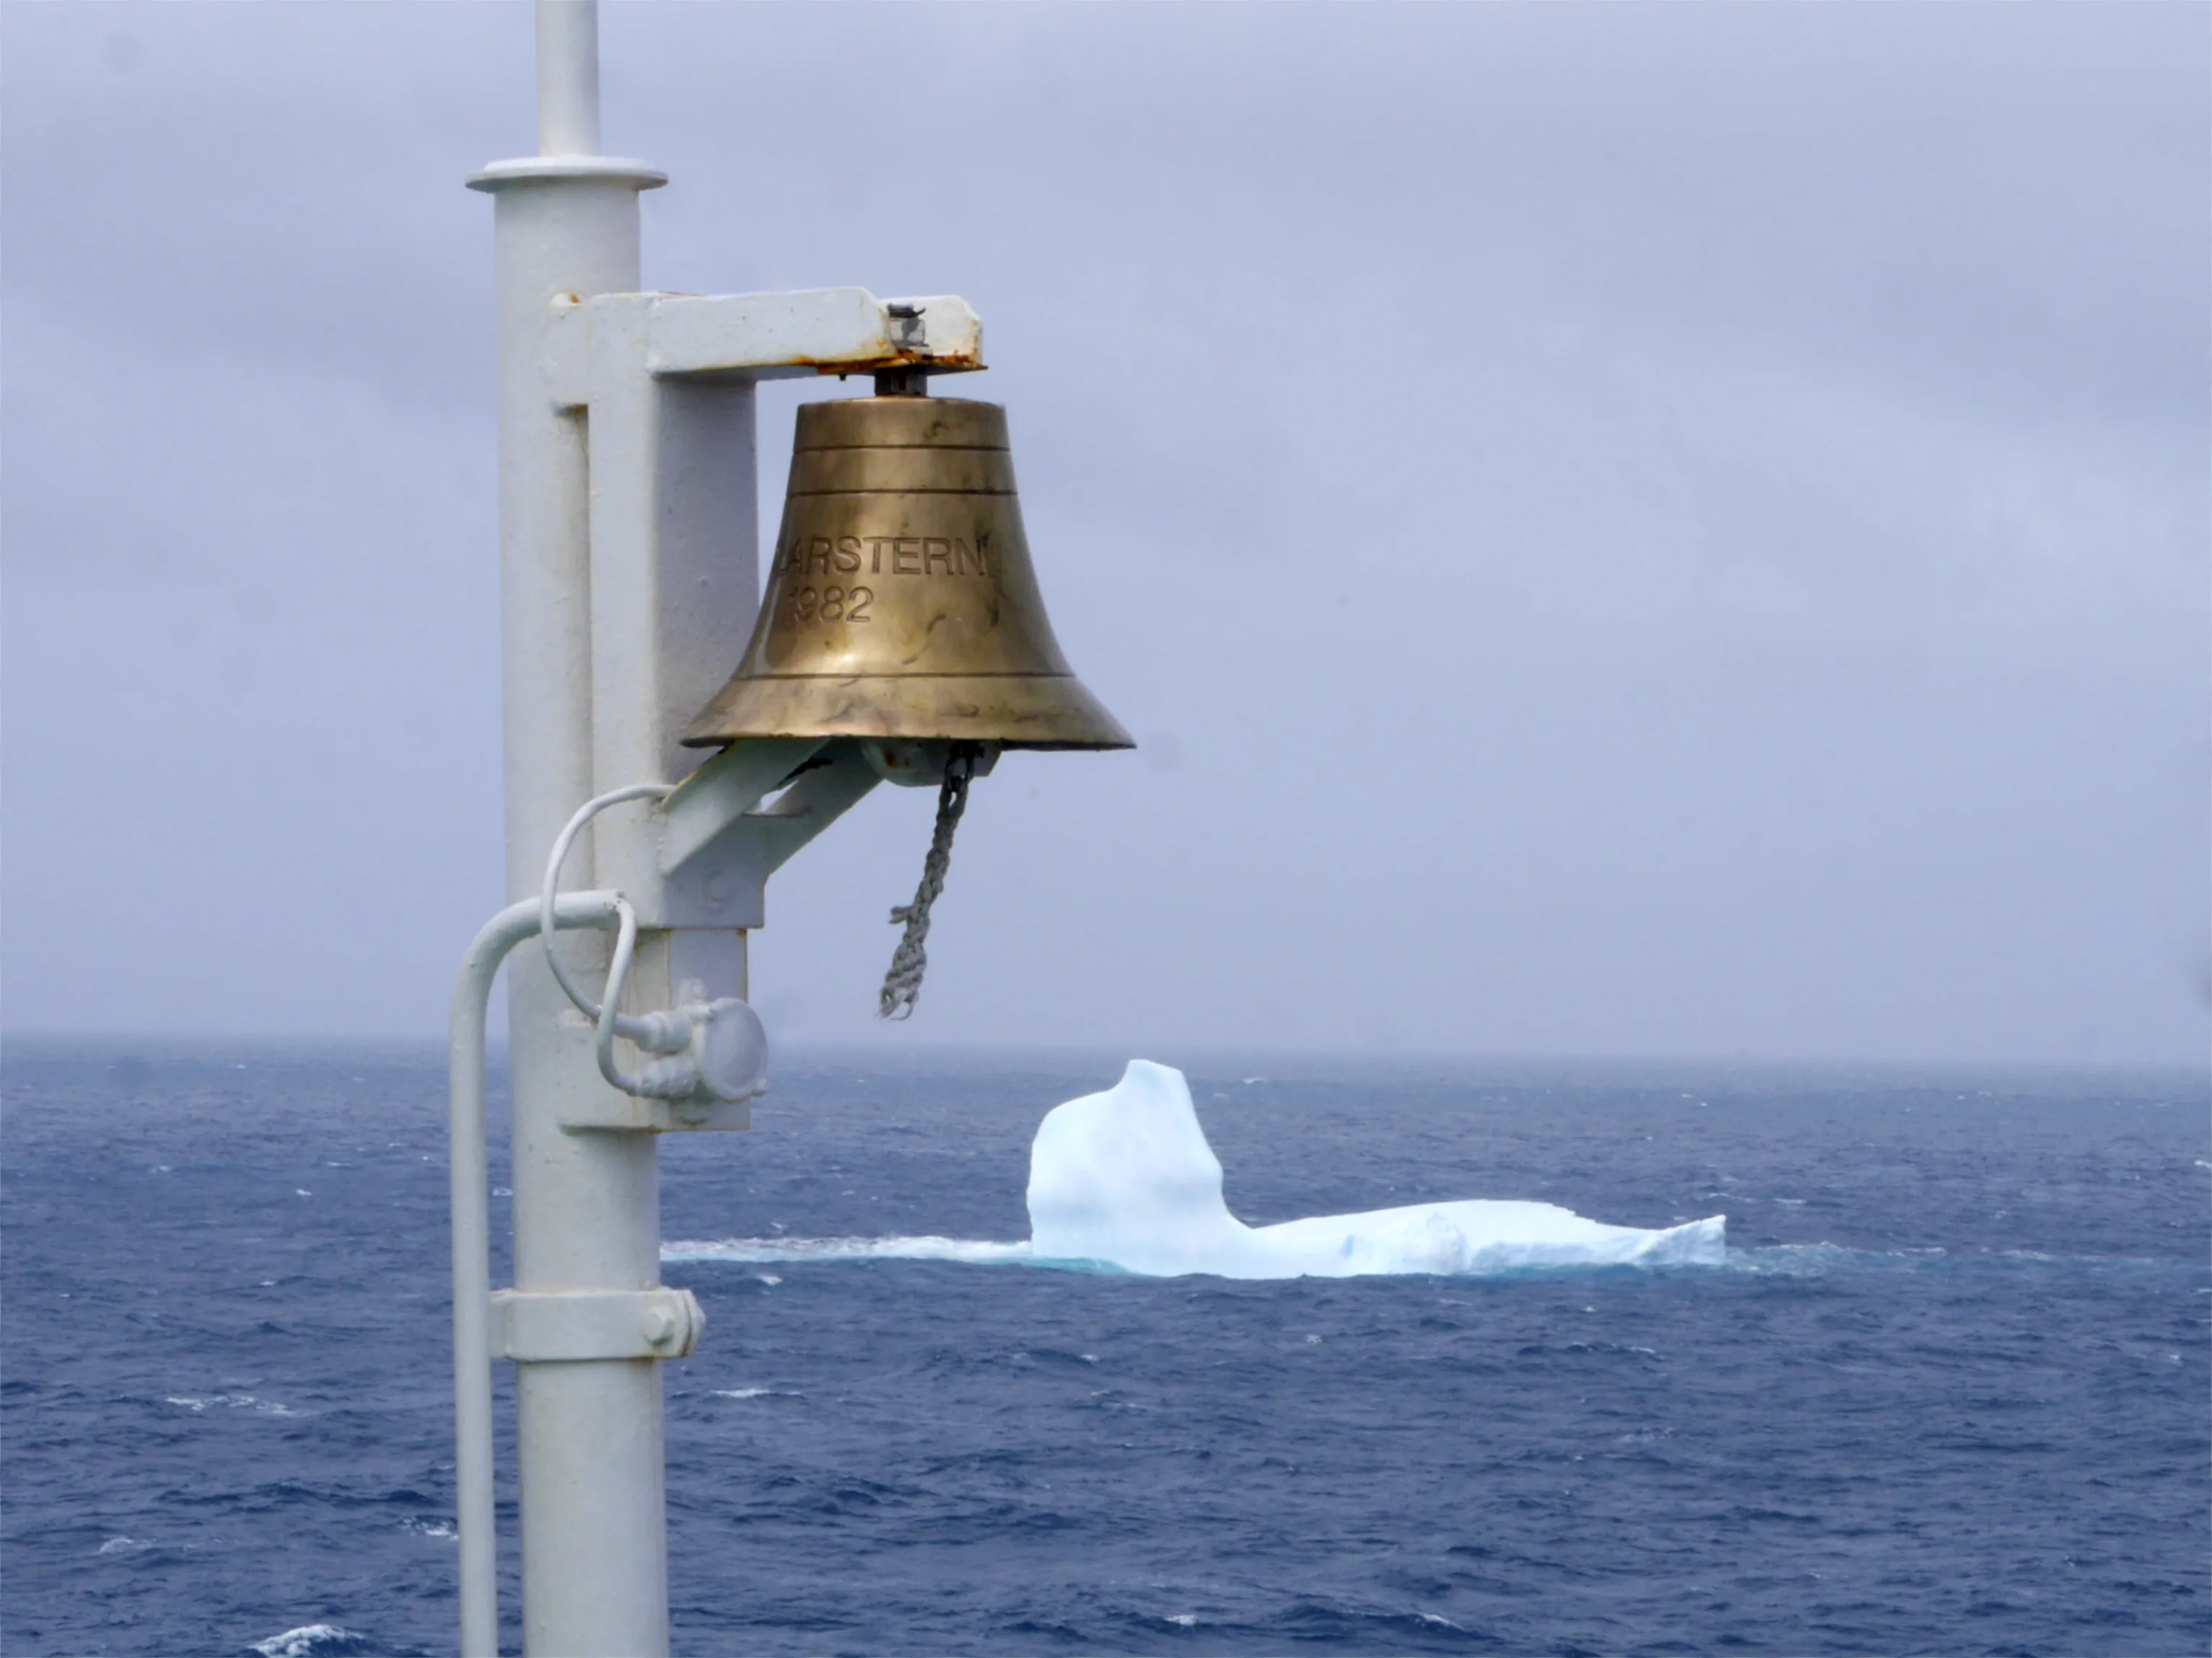 Photo of an iceberg in a grey ocean with a bell in the foreground. The iceberg has the rough outline of a bird lying on its back, and the bell has 'Polarstern 1982' written on it.